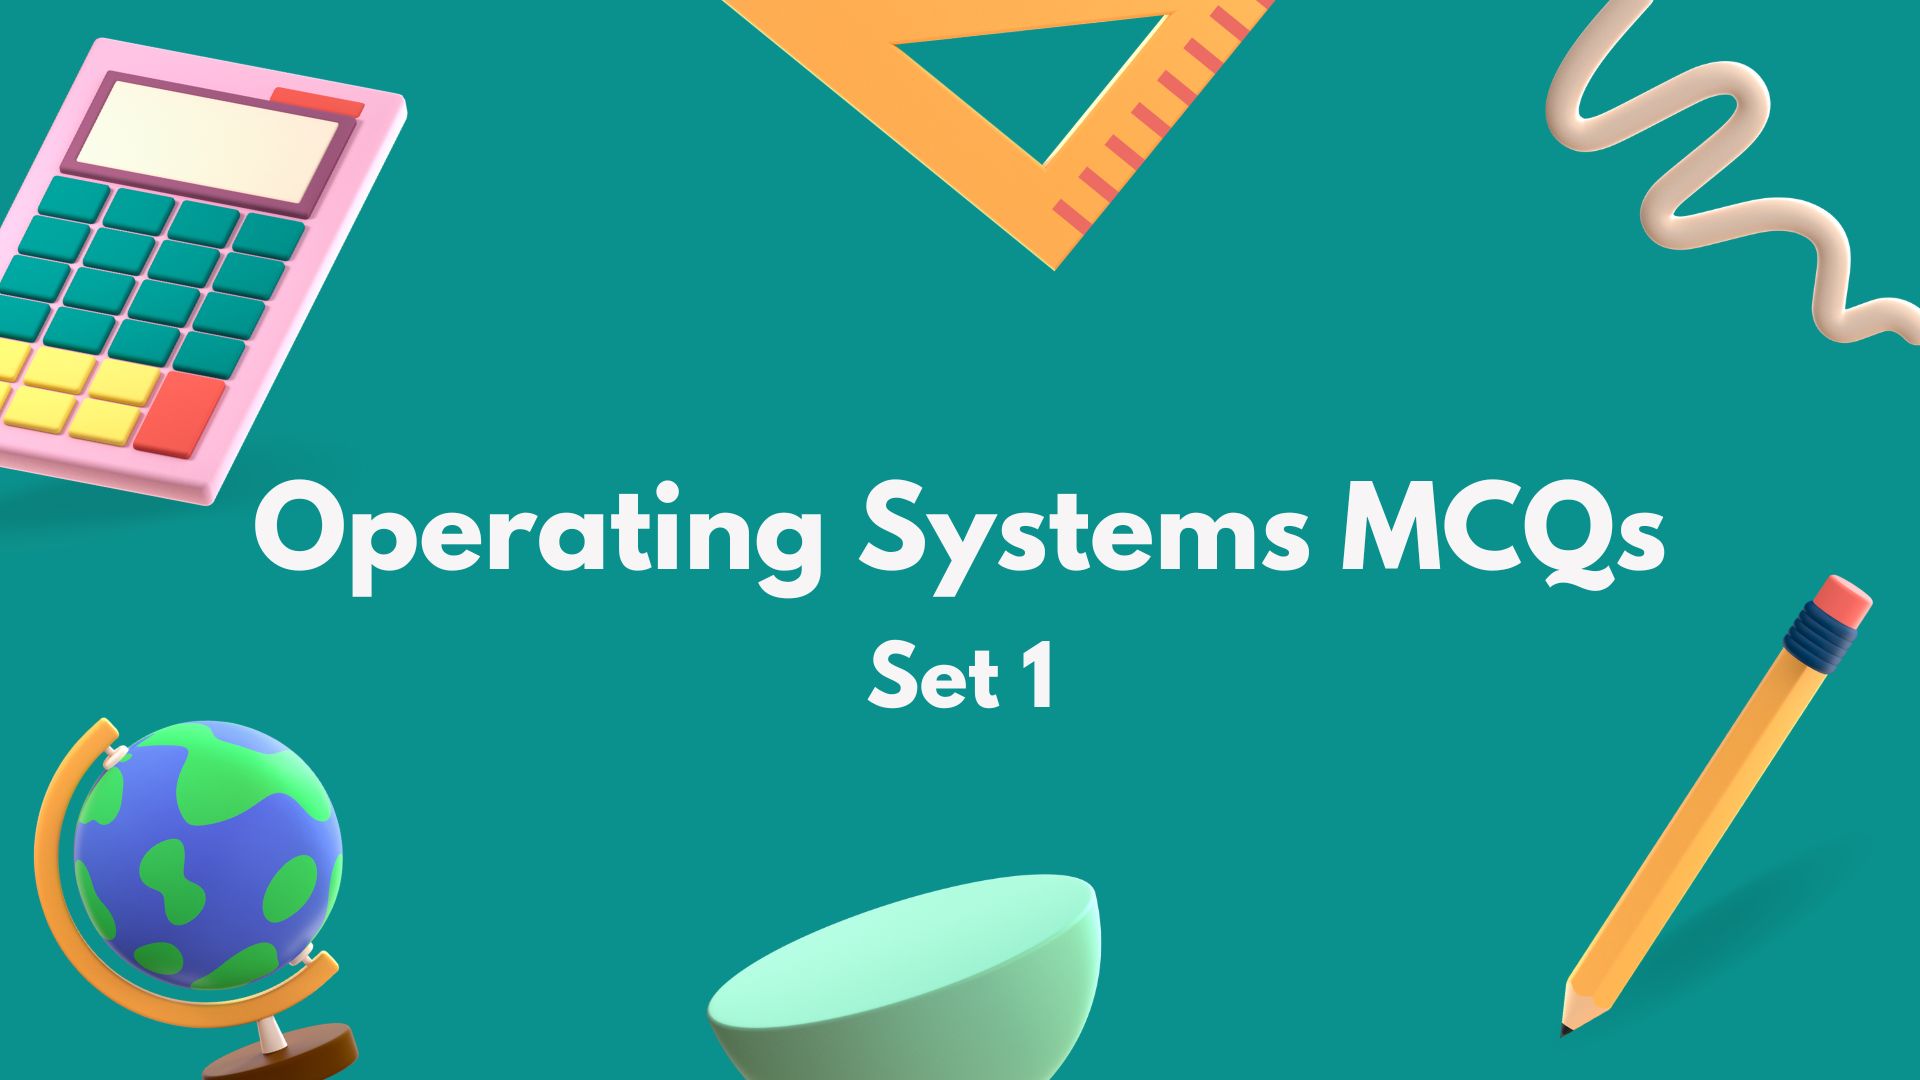 Top Operating Systems MCQ (Multiple Choice Questions) Set 1